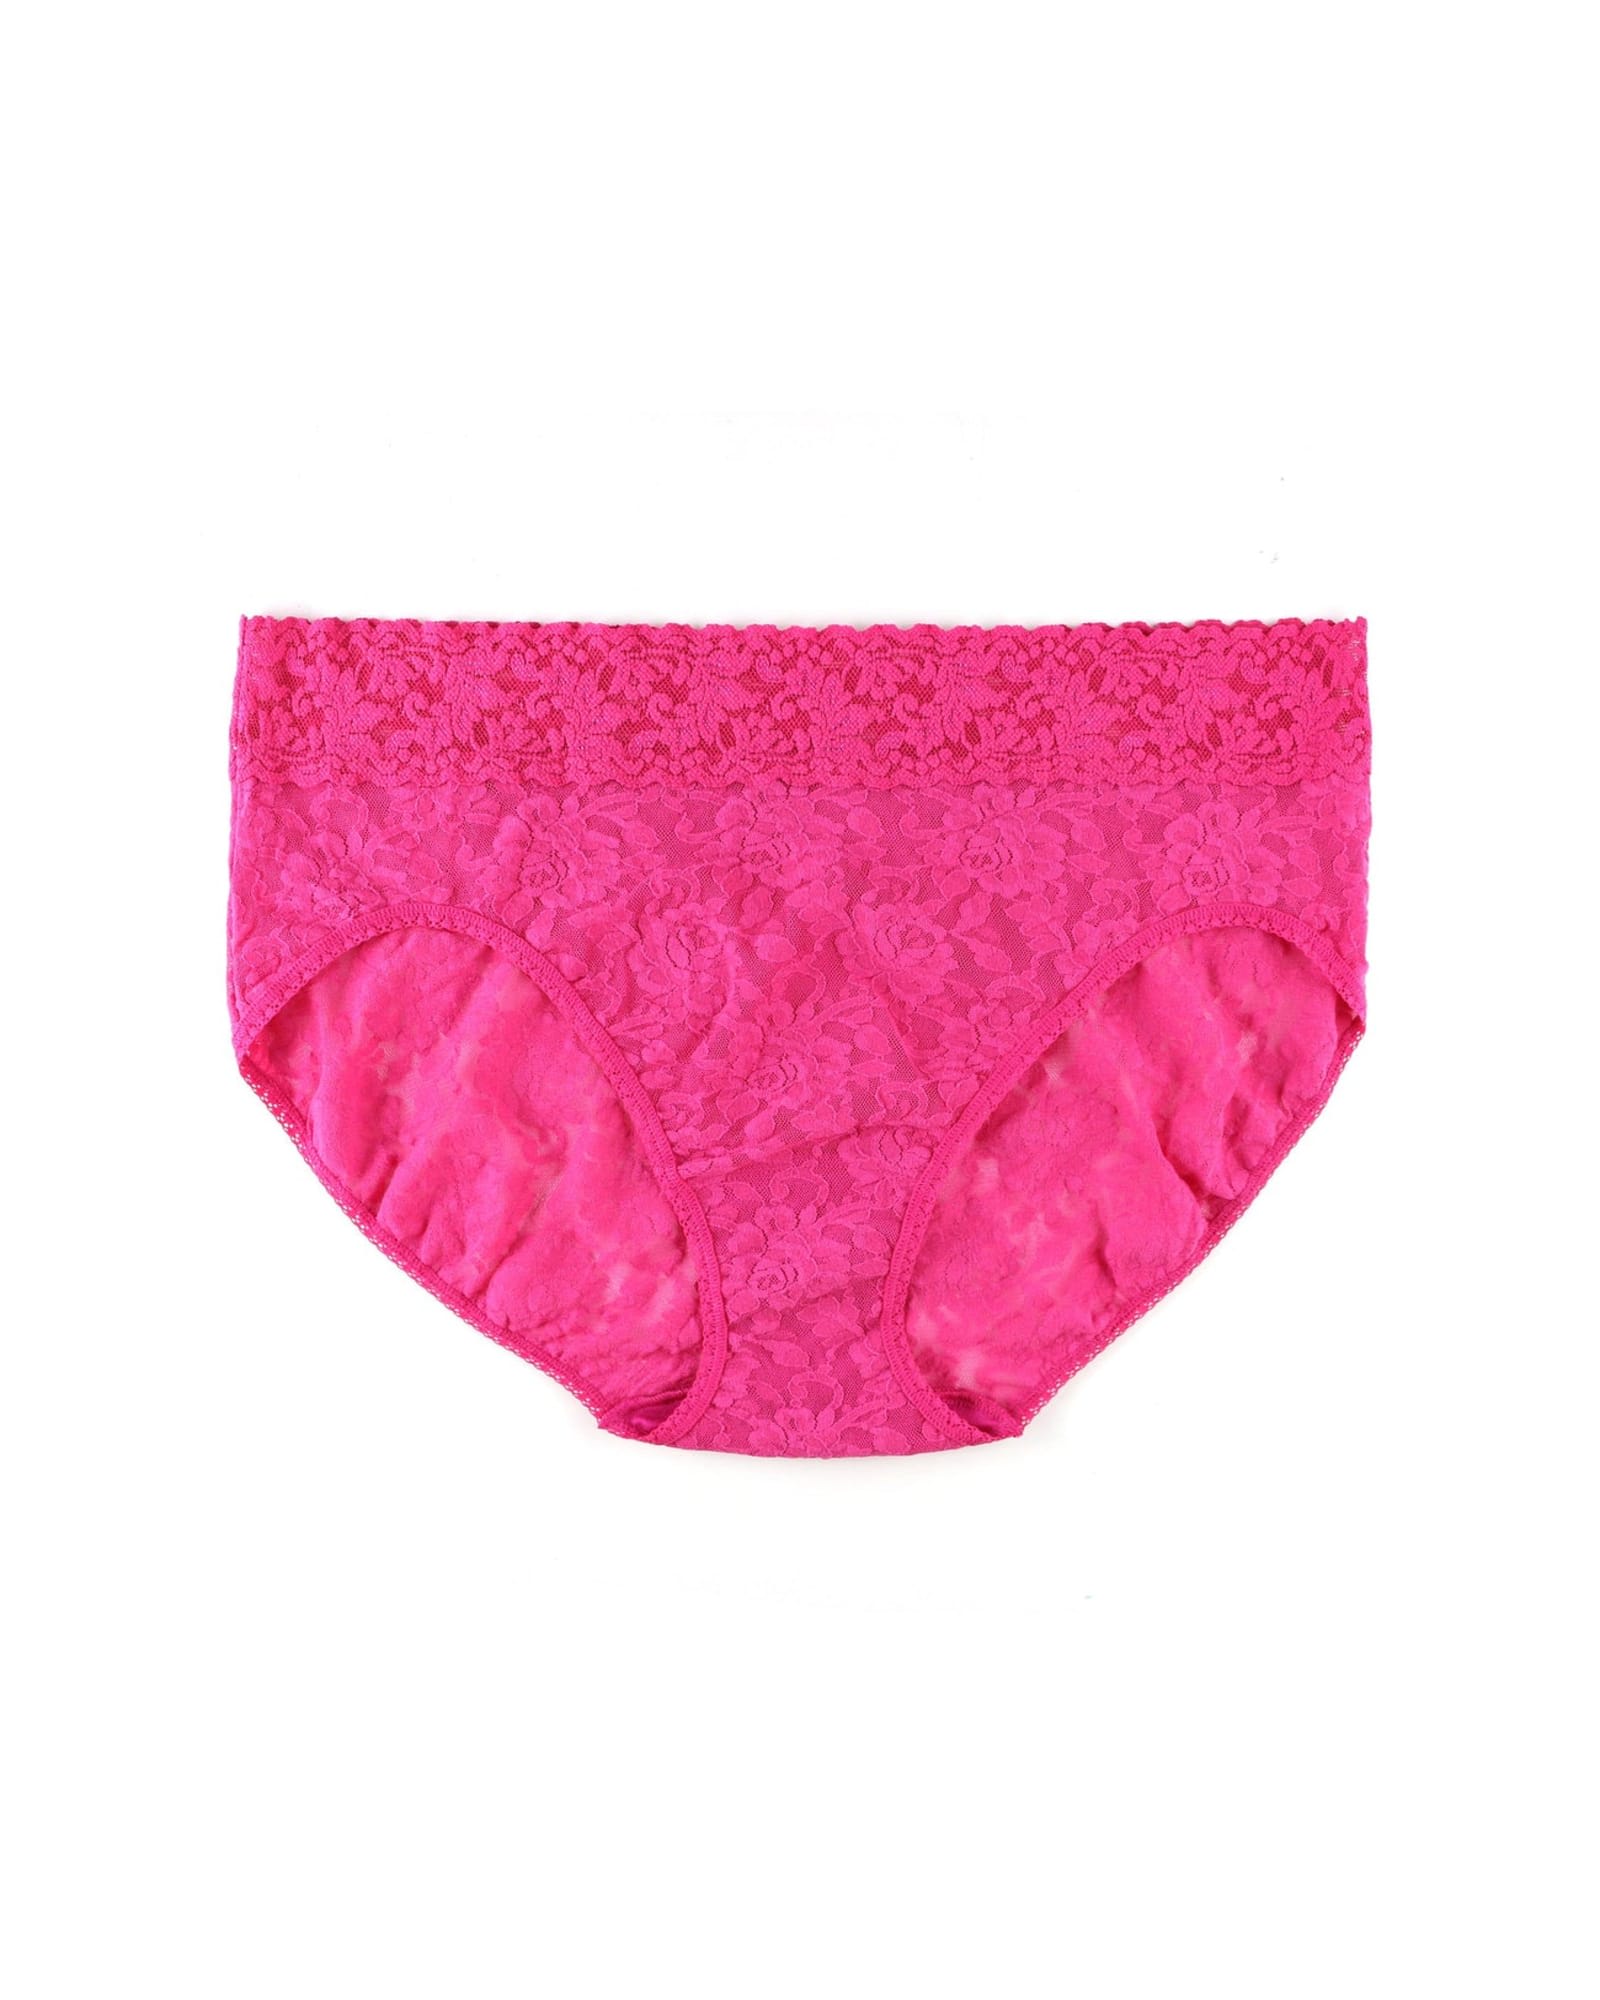 Kawaii Lace Pink Lace Panties For Women Blue And Pink Briefs With